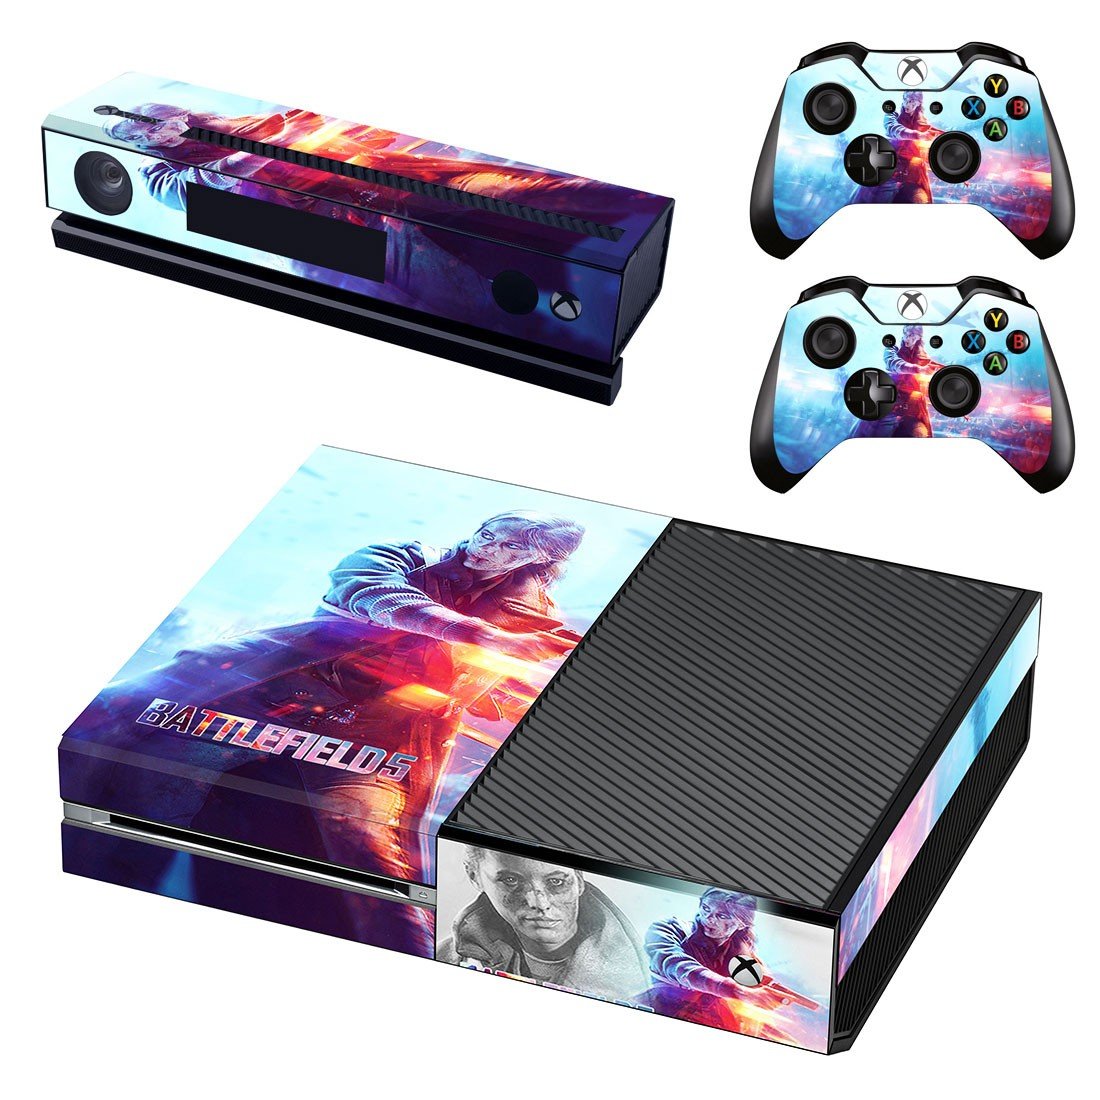 Battlefield 5 Sticker For Xbox One And Controllers